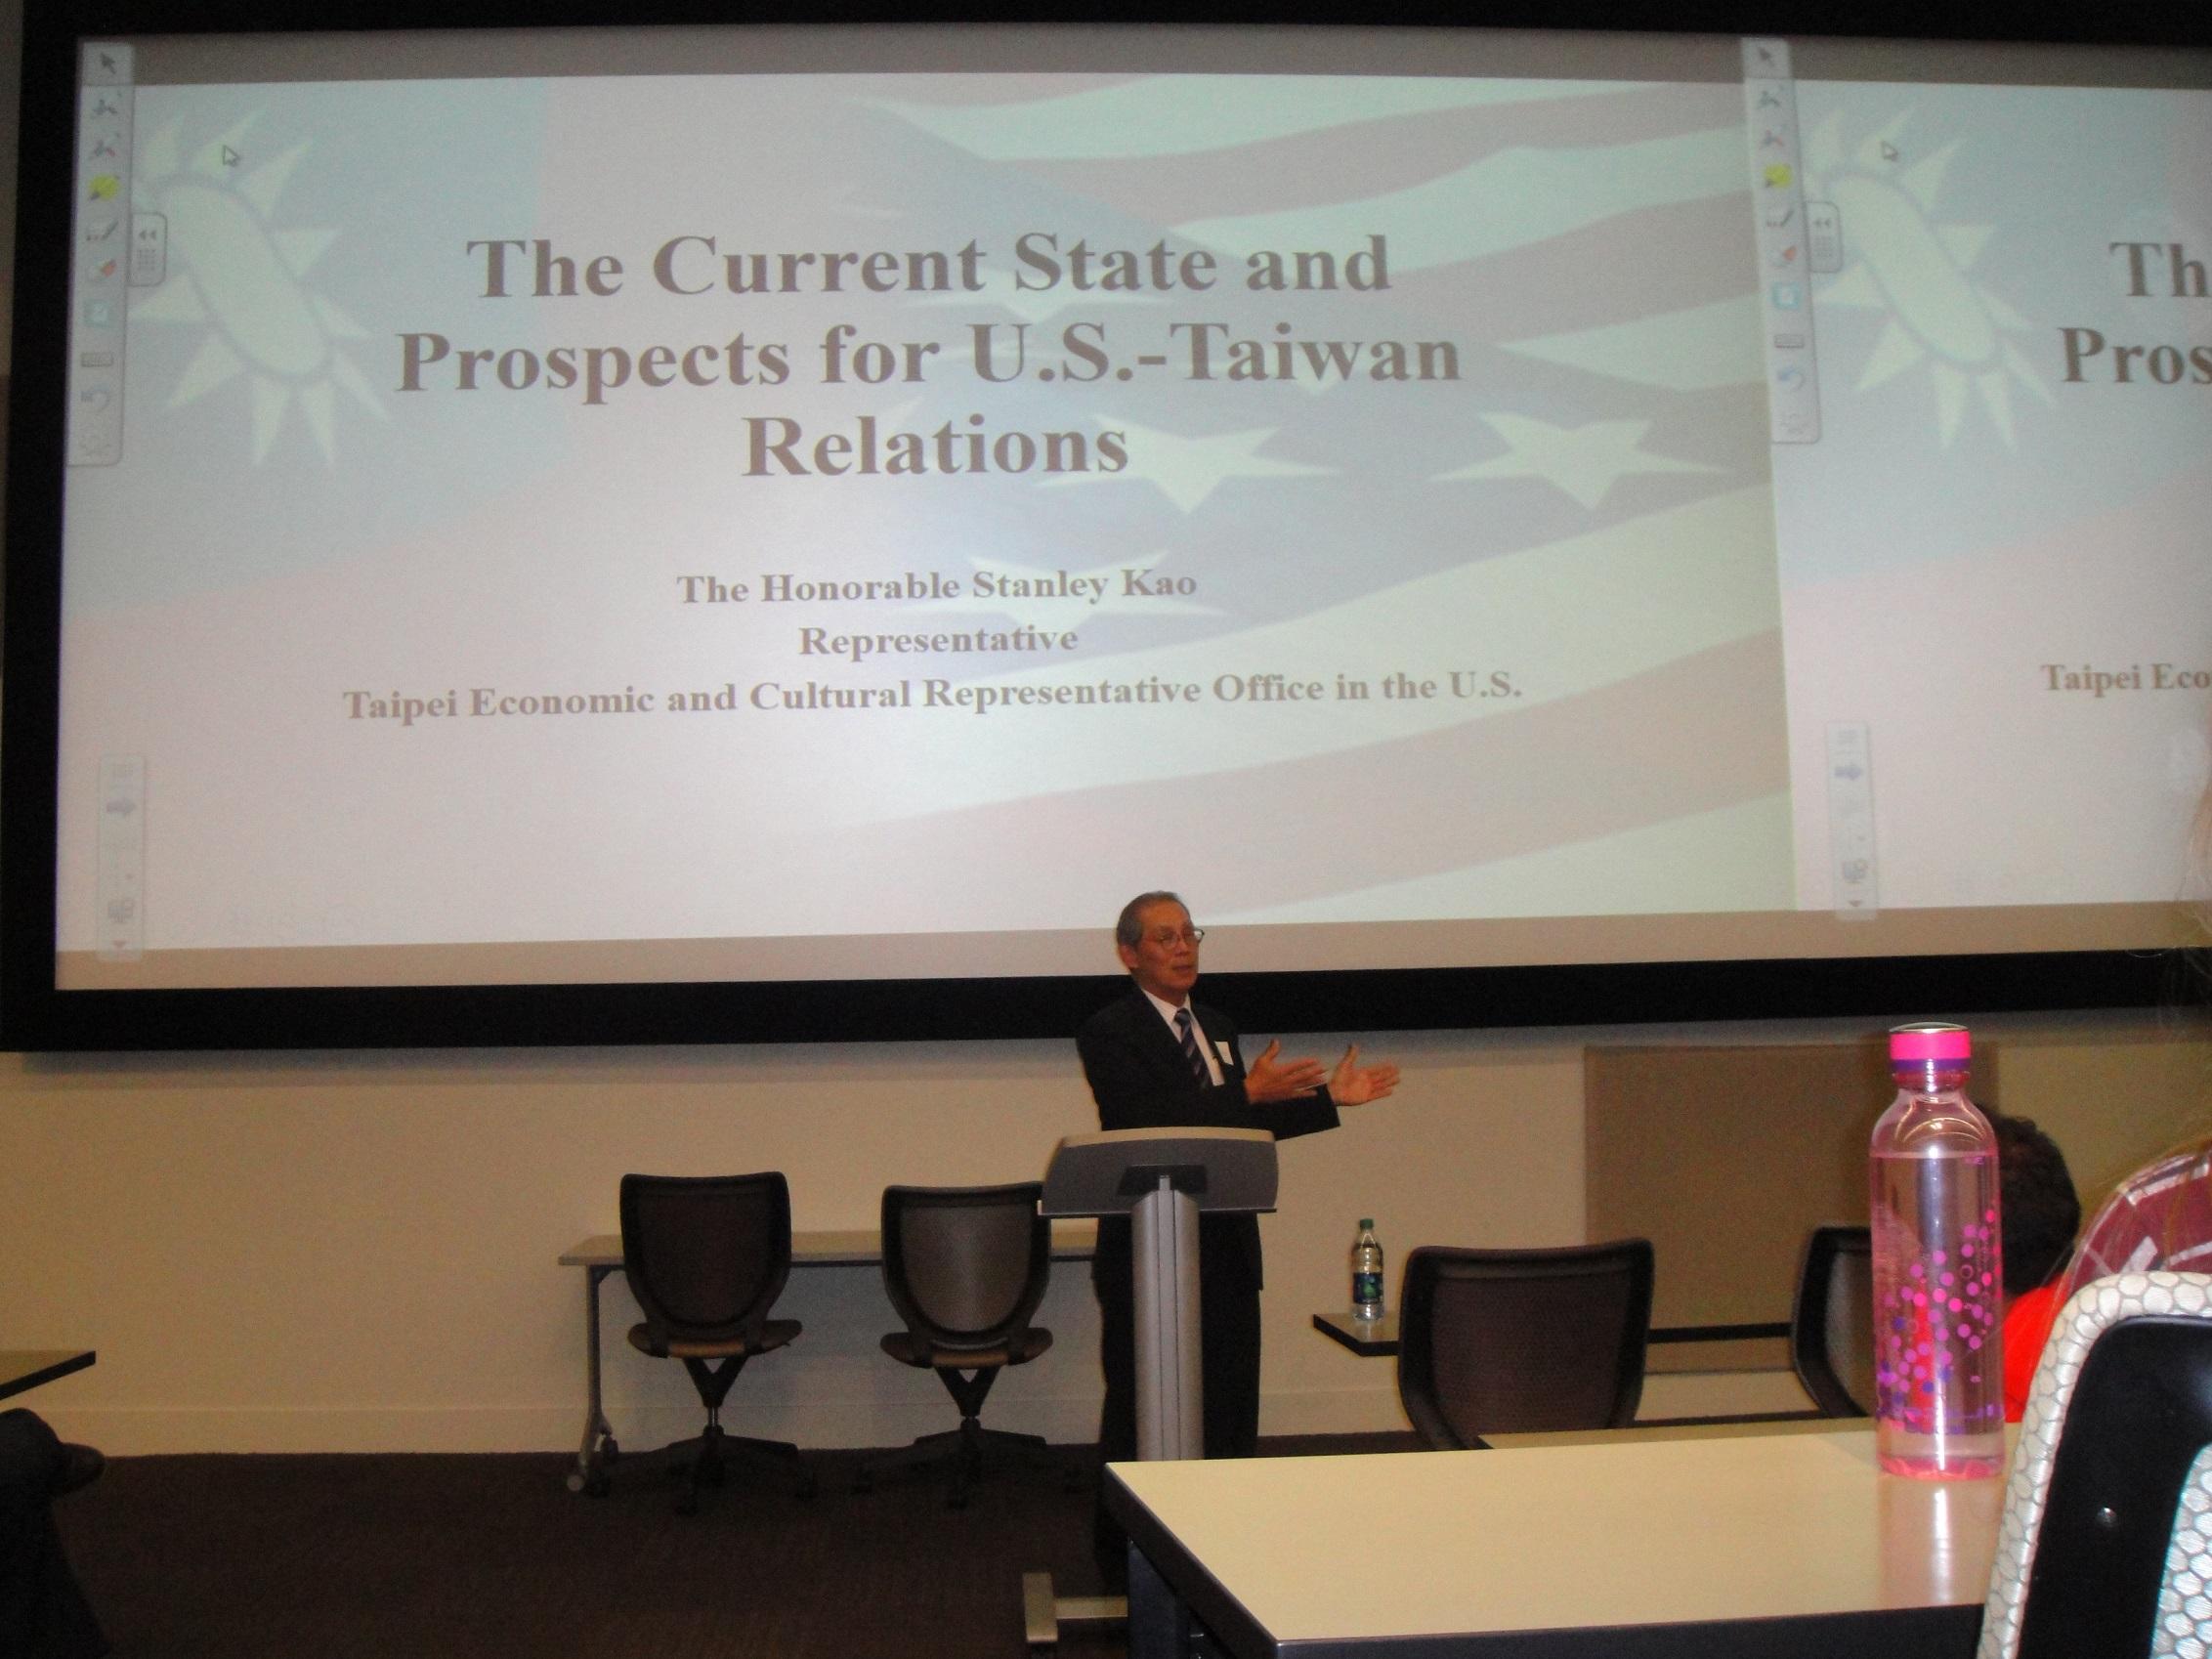 At the invitation of Georgia Institute of Technology, Representative Stanley Kao delivered his speech, titled “The Current State and Prospects for U.S.-Taiwan Relations,” in front of 150 faculty and students.